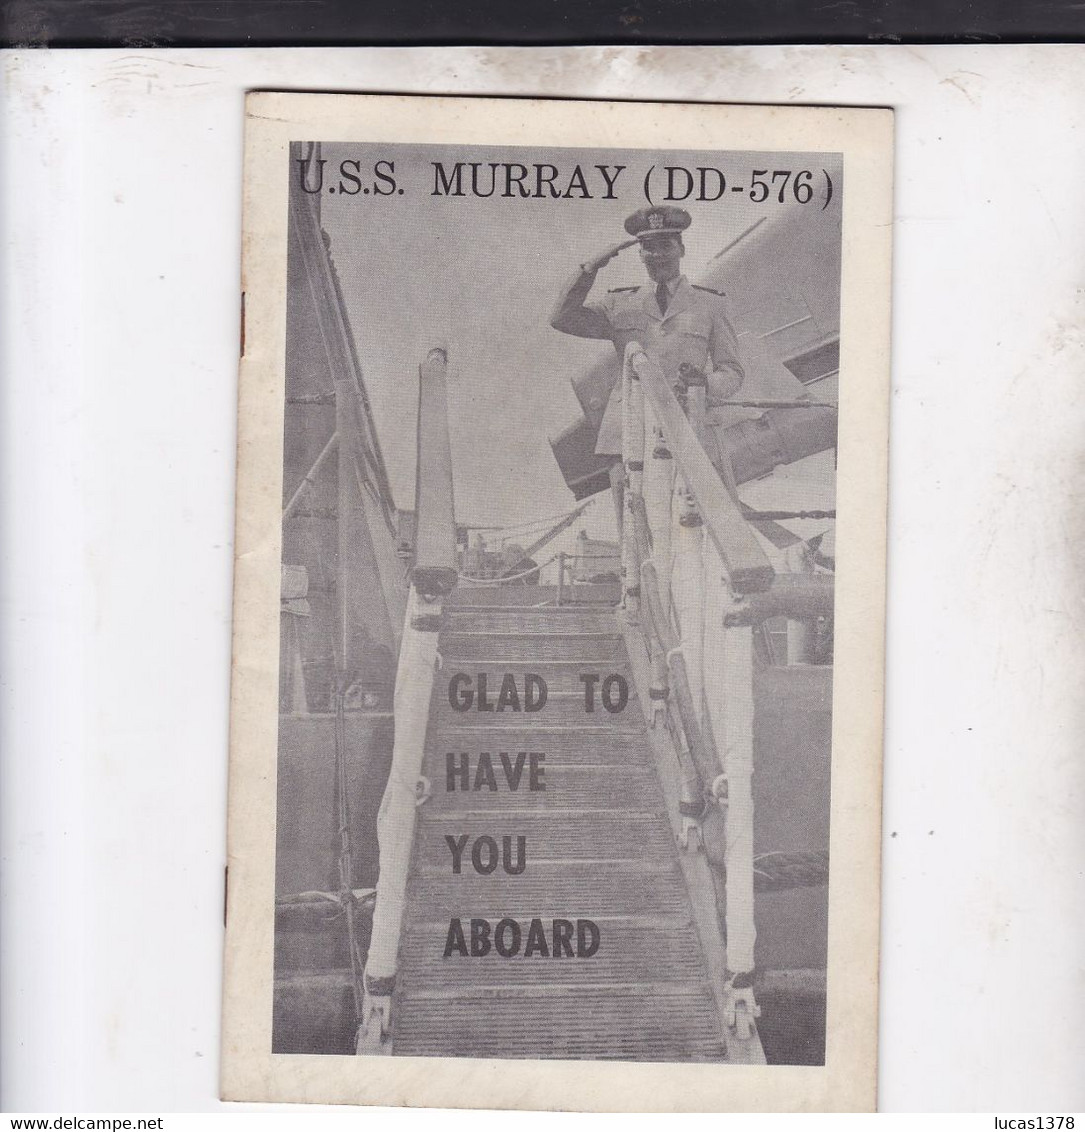 USS MURRAY / DD 576 / GLAD TO HAVE YOU ABOARD / LIVRET DE BORD 8 PAGES / RARE - US Army